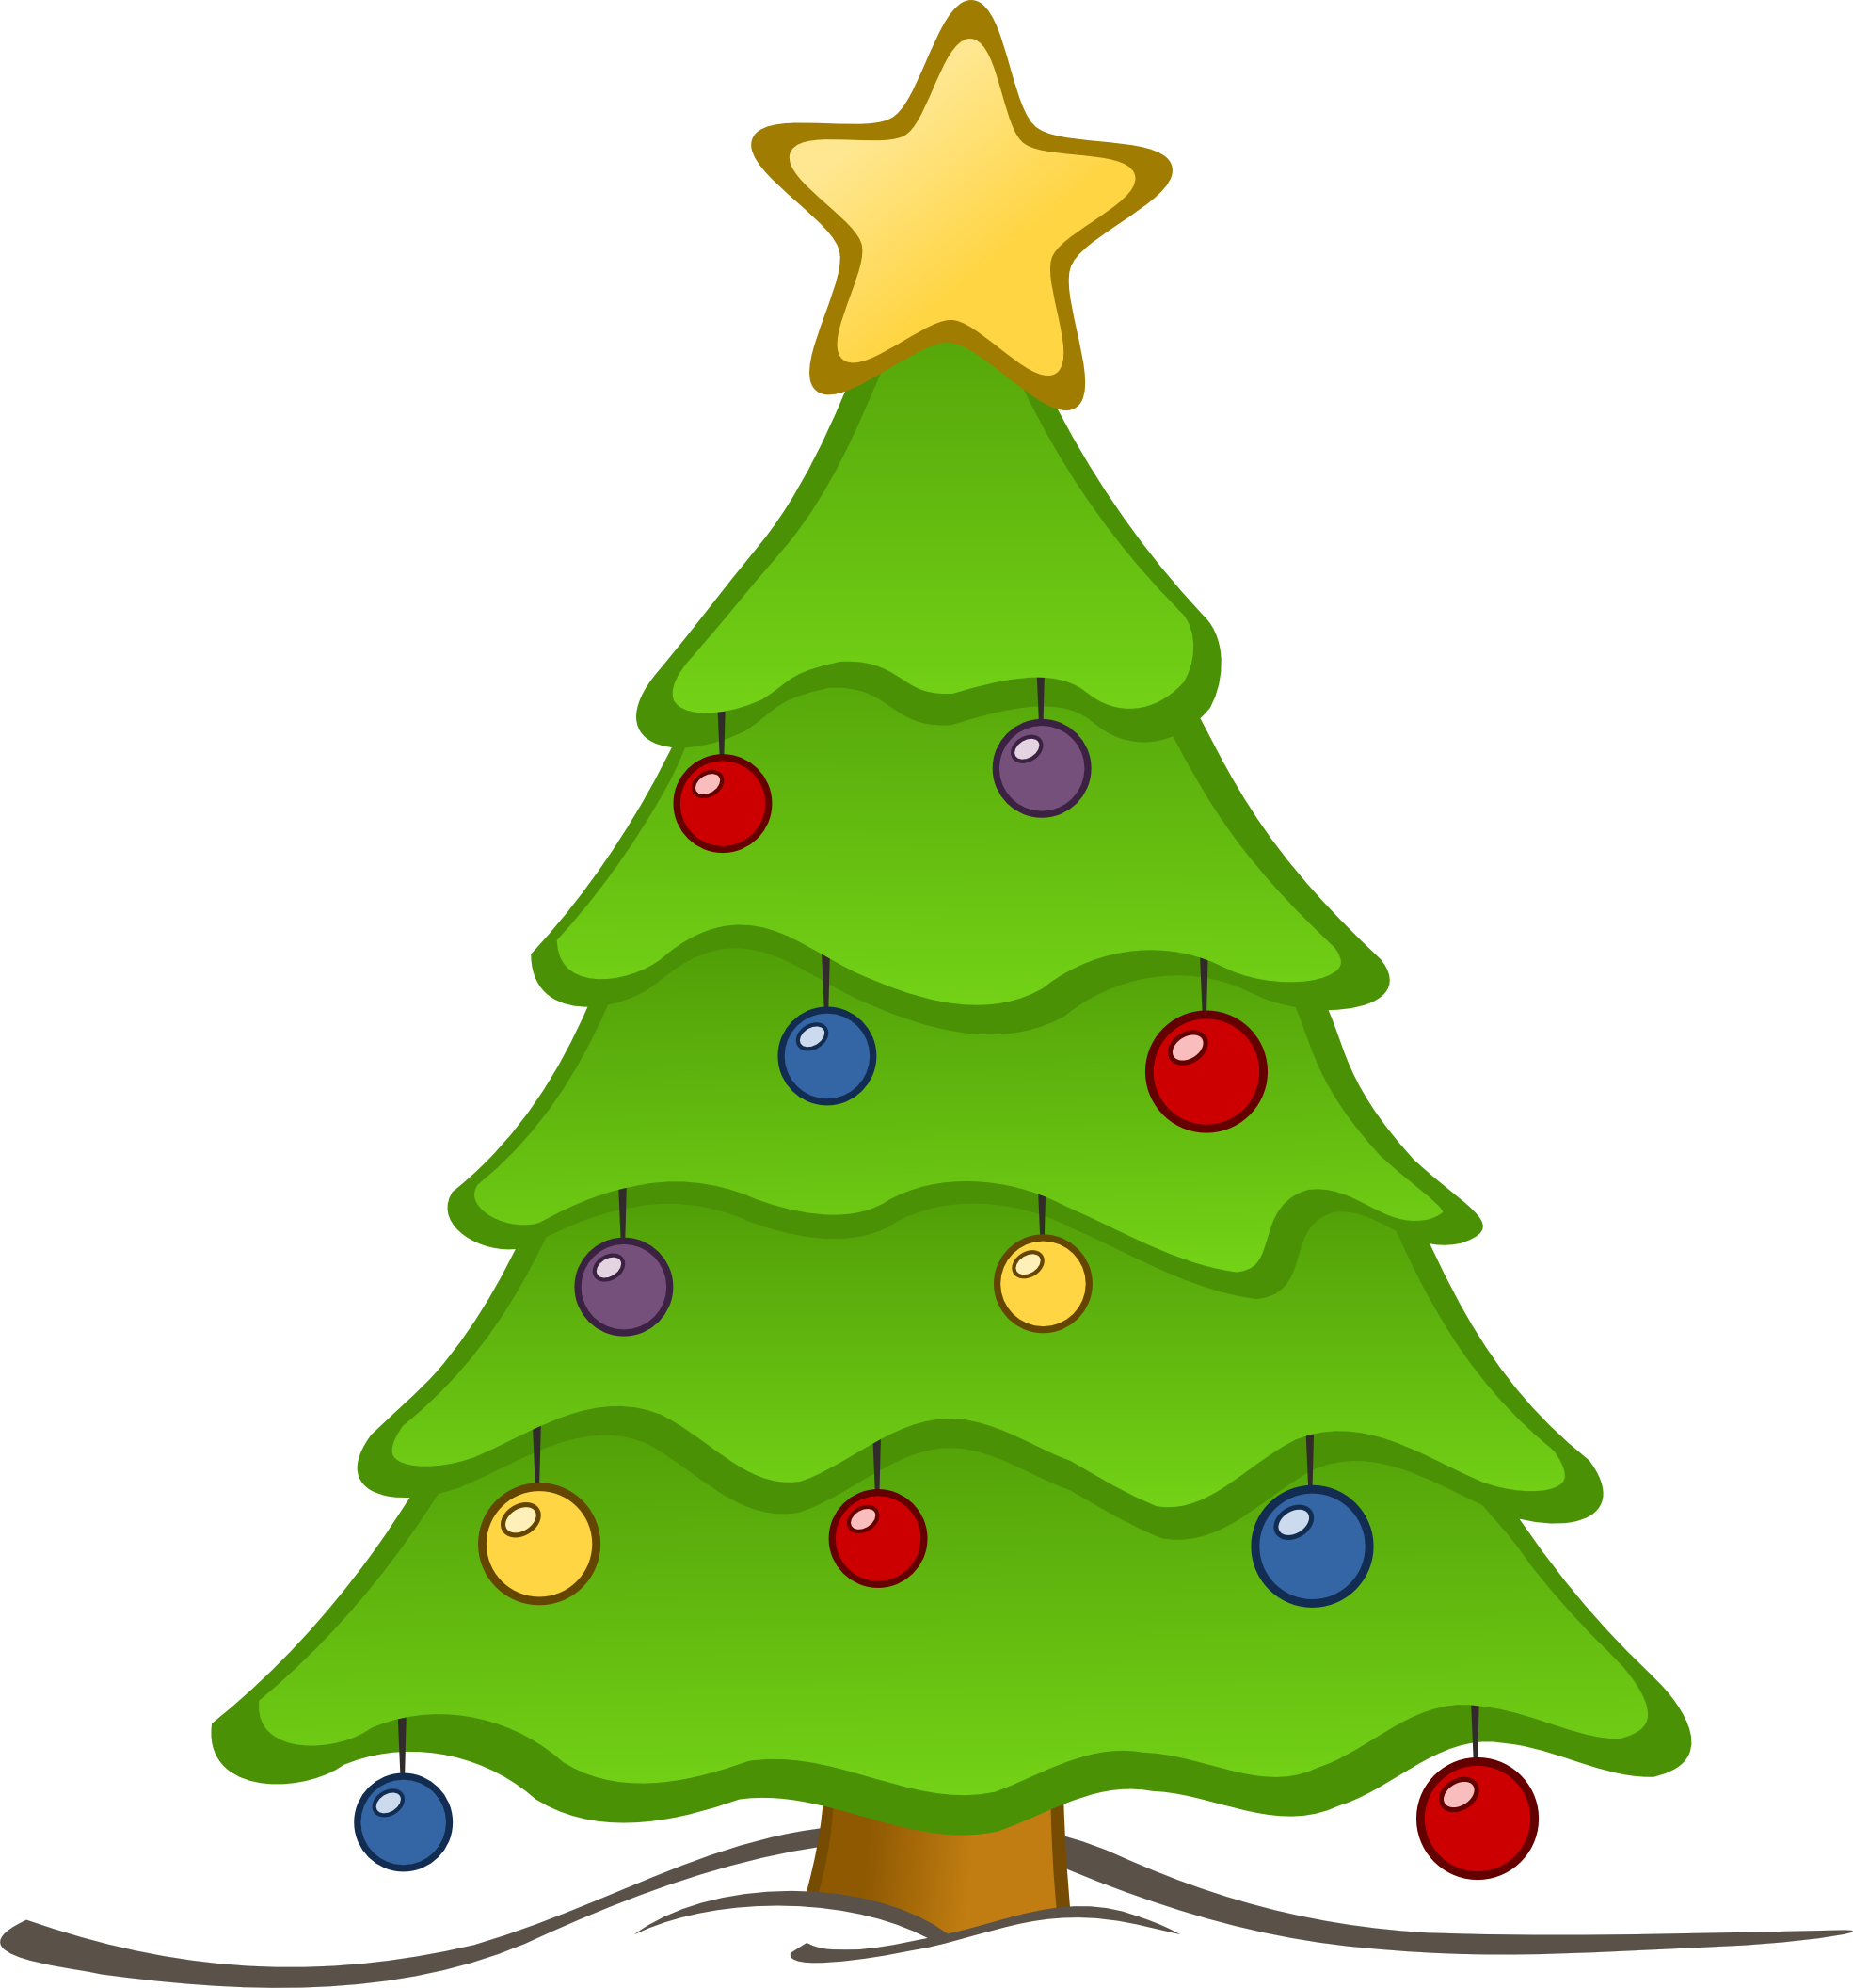 christmas-tree-clip-art - Greater Tampa Bay Area Council